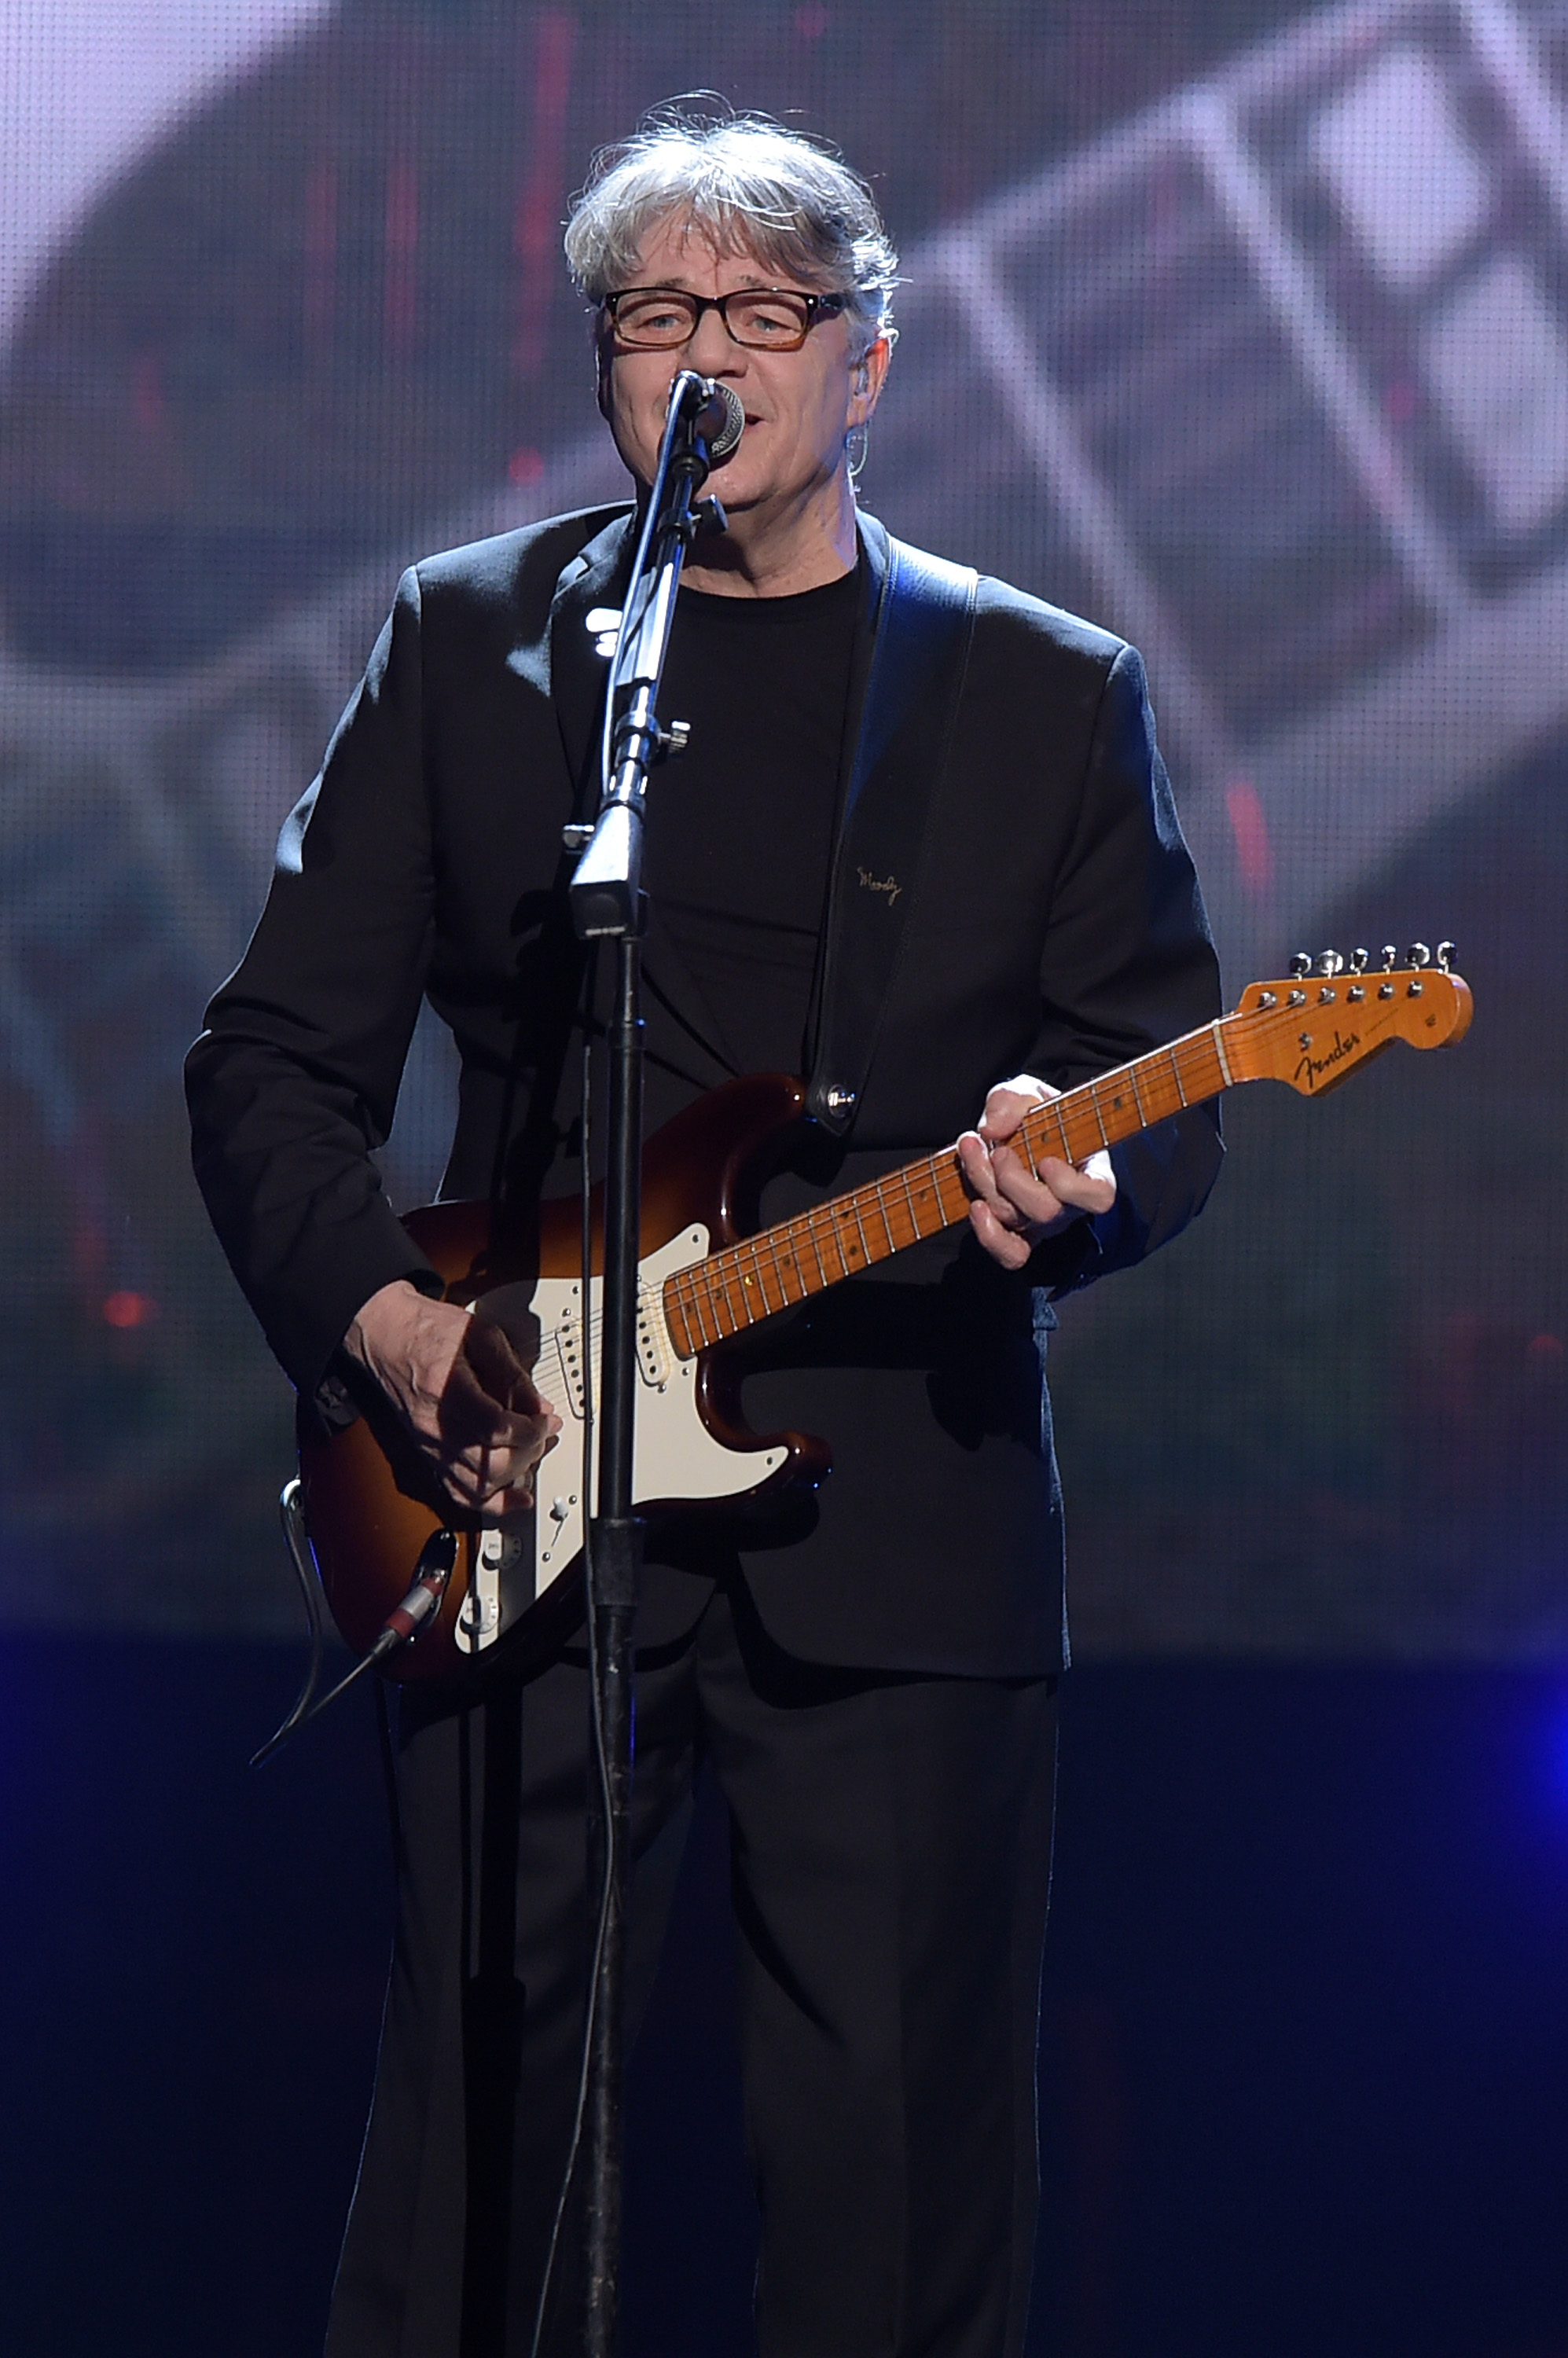 NEW YORK, NEW YORK - APRIL 08:  Inductee Steve Miller performs at the 31st Annual Rock And Roll Hall Of Fame Induction Ceremony at Barclays Center on April 8, 2016 in New York City.  (Photo by Theo Wargo/Getty Images) ORG XMIT: 627136767 ORIG FILE ID: 519905914